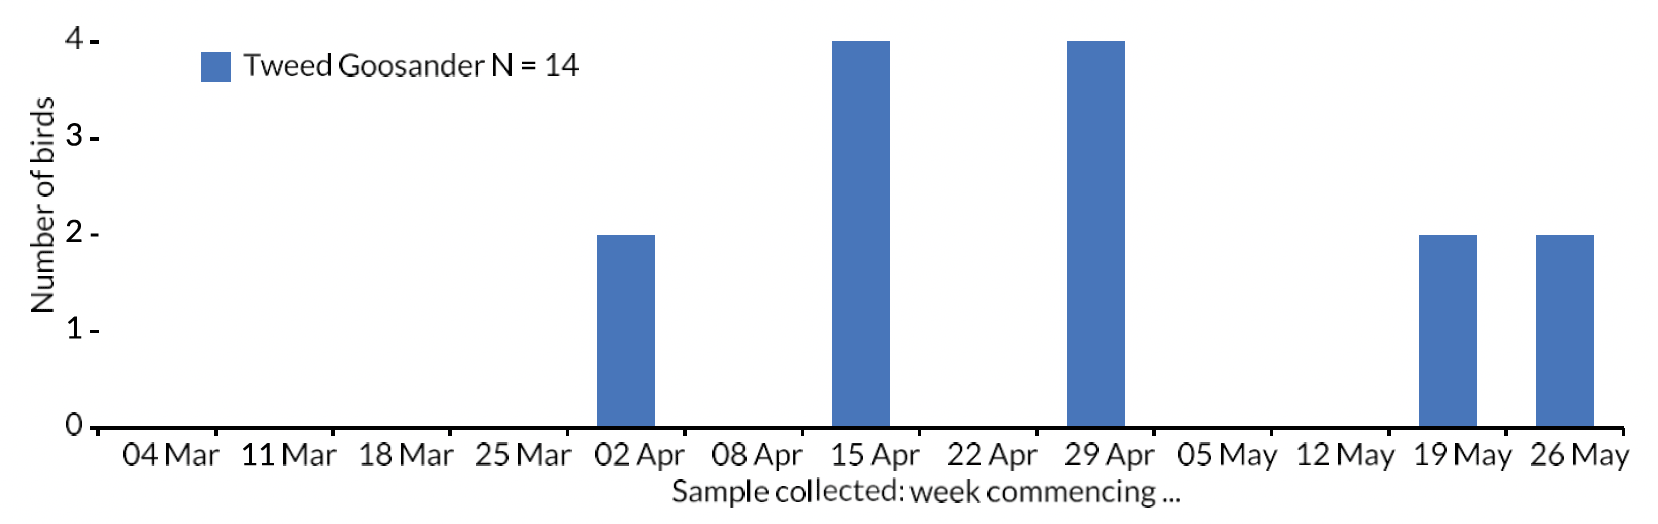 Bar chart of the number of River Tweed Goosanders collected each week during the 2019 smolt run period.